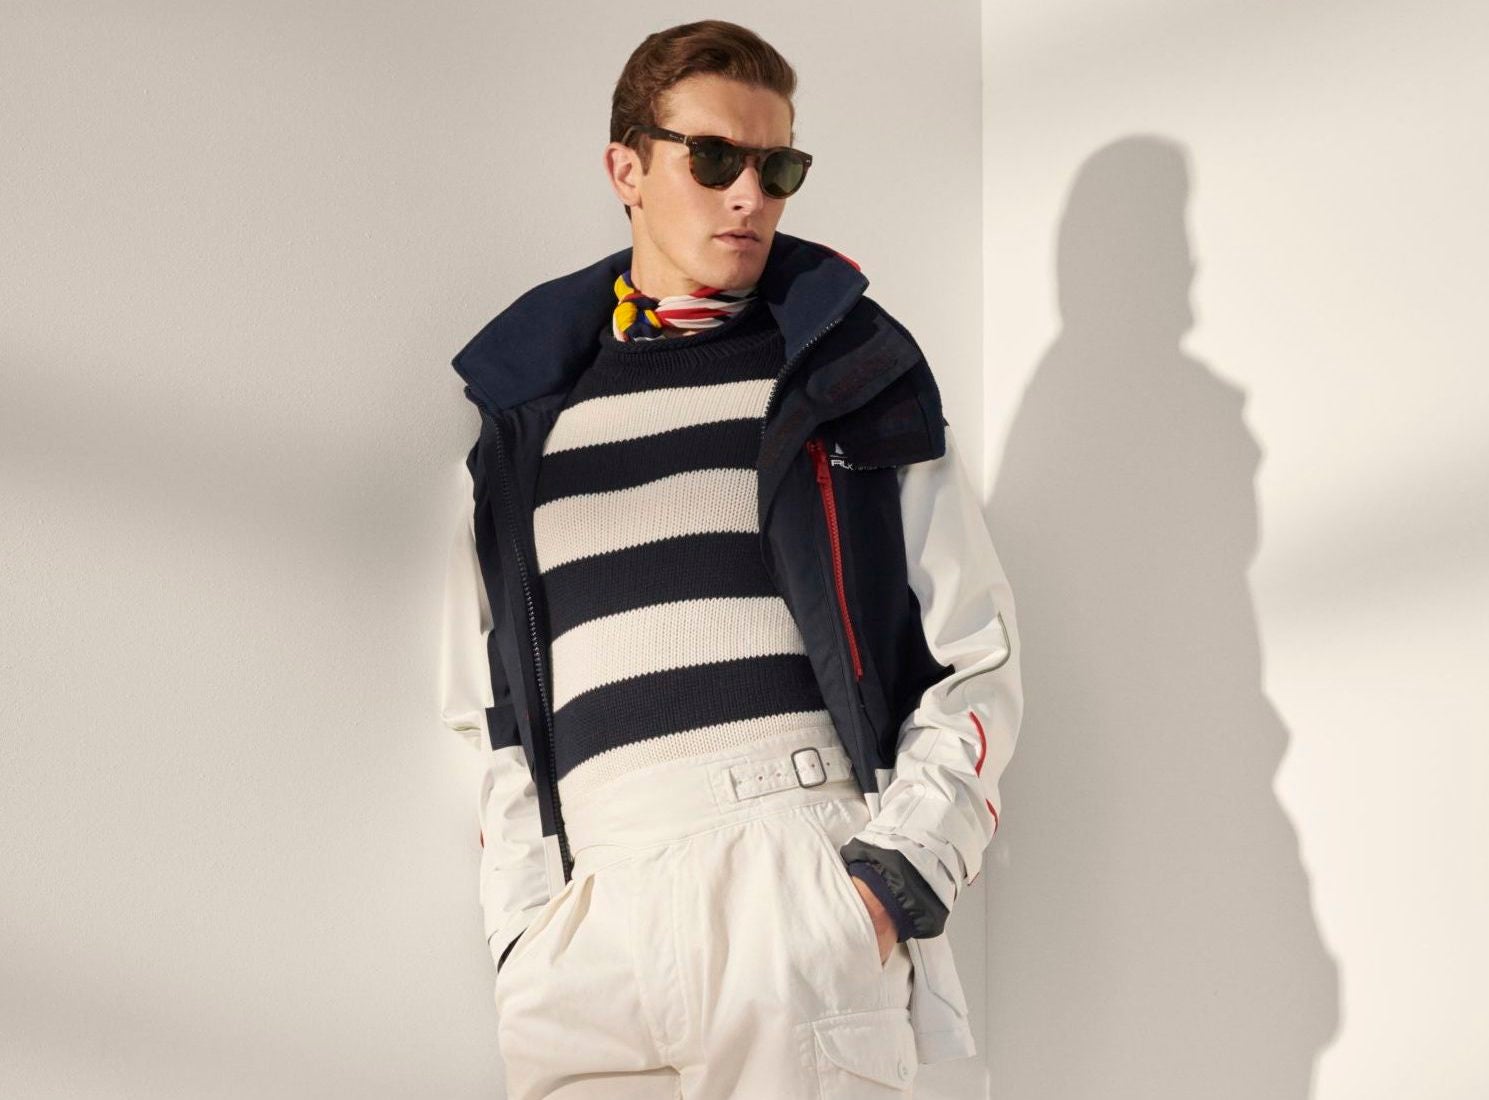 Two if By Sea: Nautical Fashion for Men